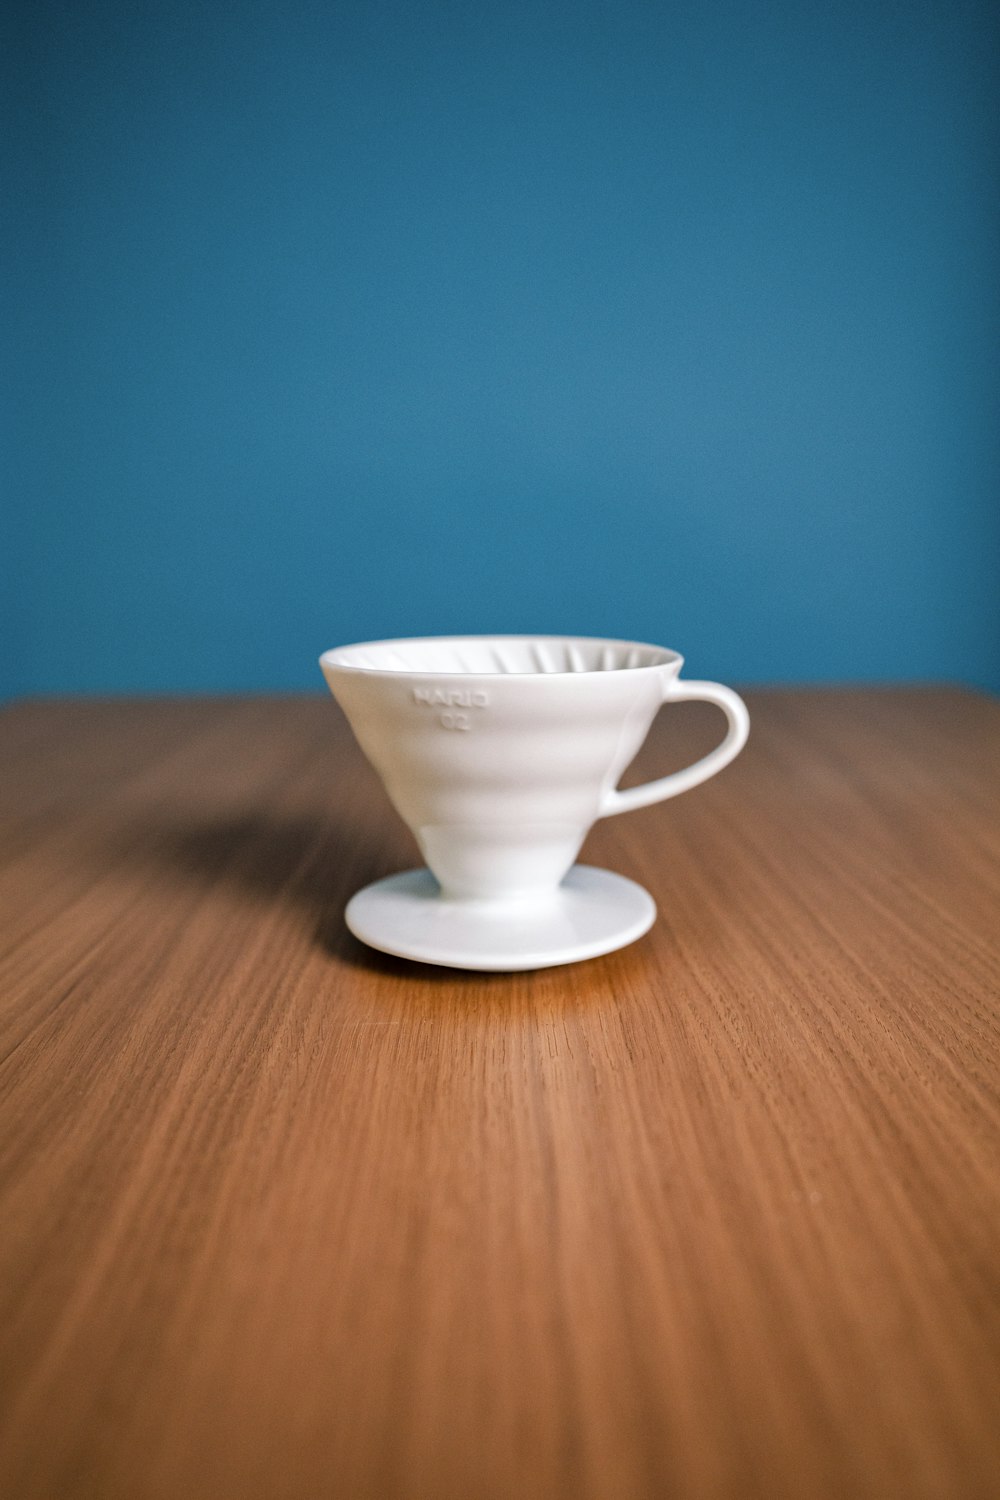 white ceramic teacup on white saucer on brown wooden table